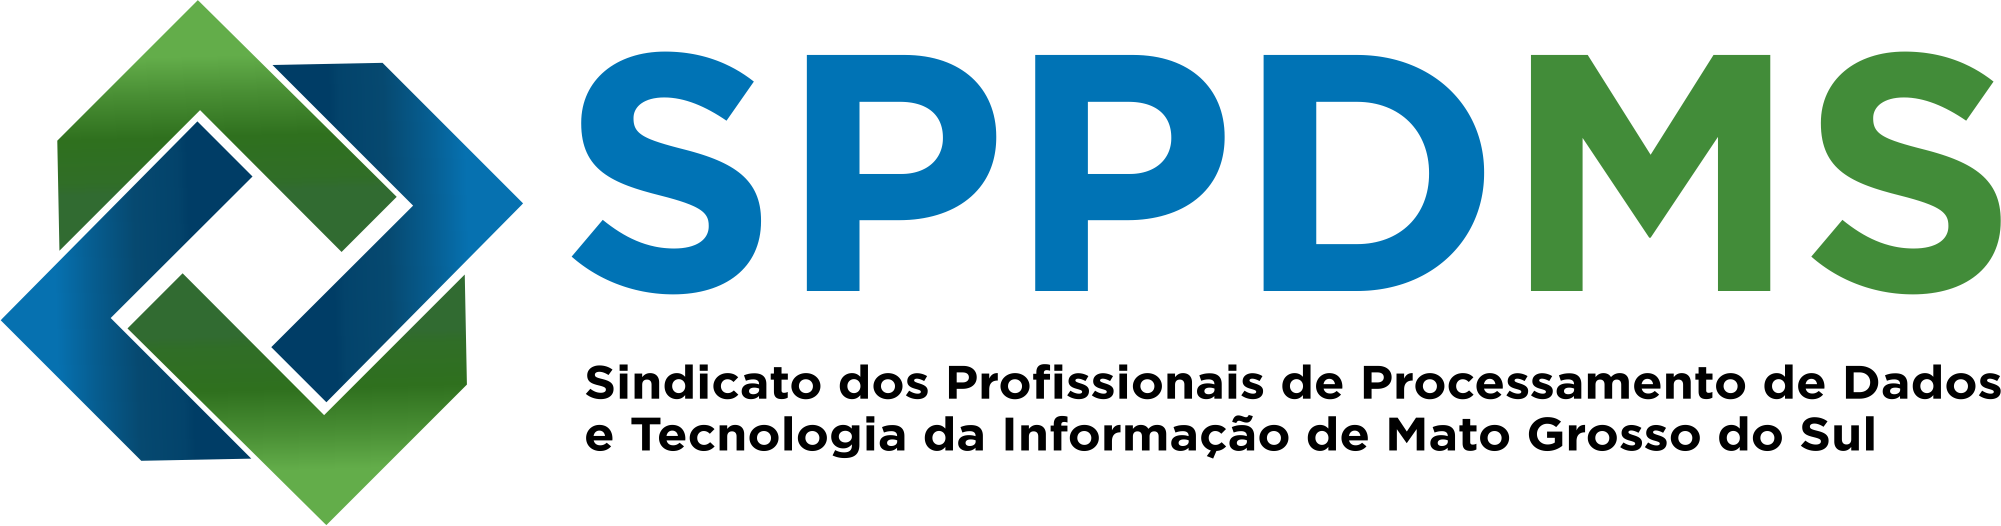 SPPD-MS